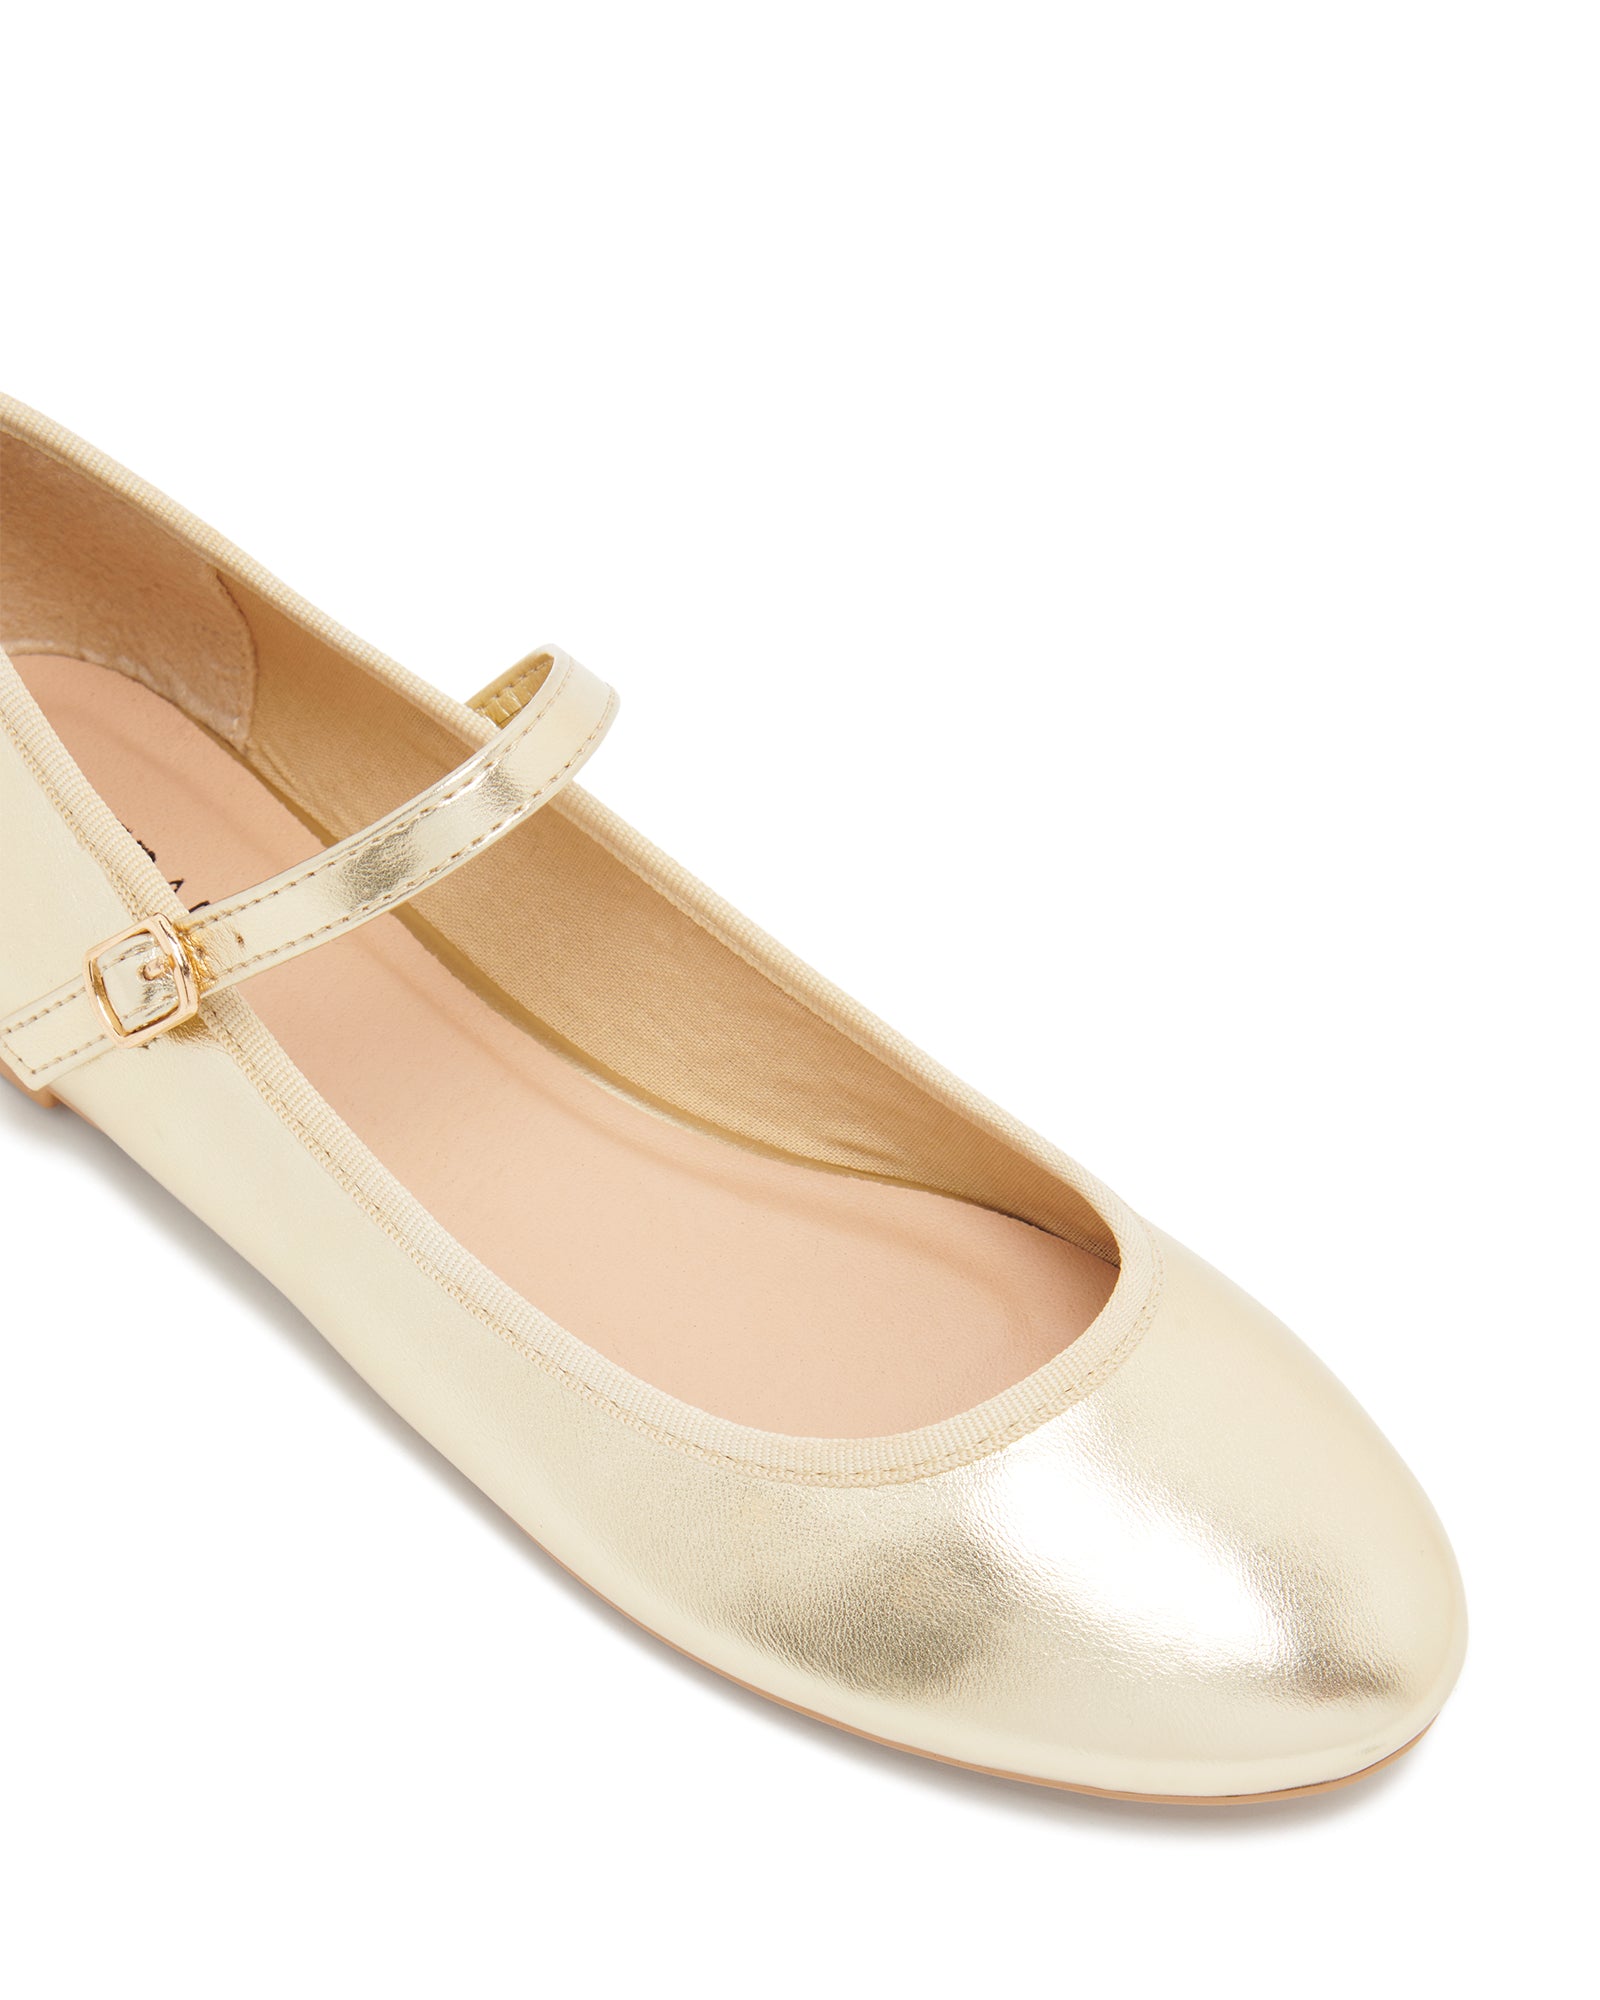 Therapy Shoes Jayne Gold Metallic | Women's Flats | Ballet | Mary Jane